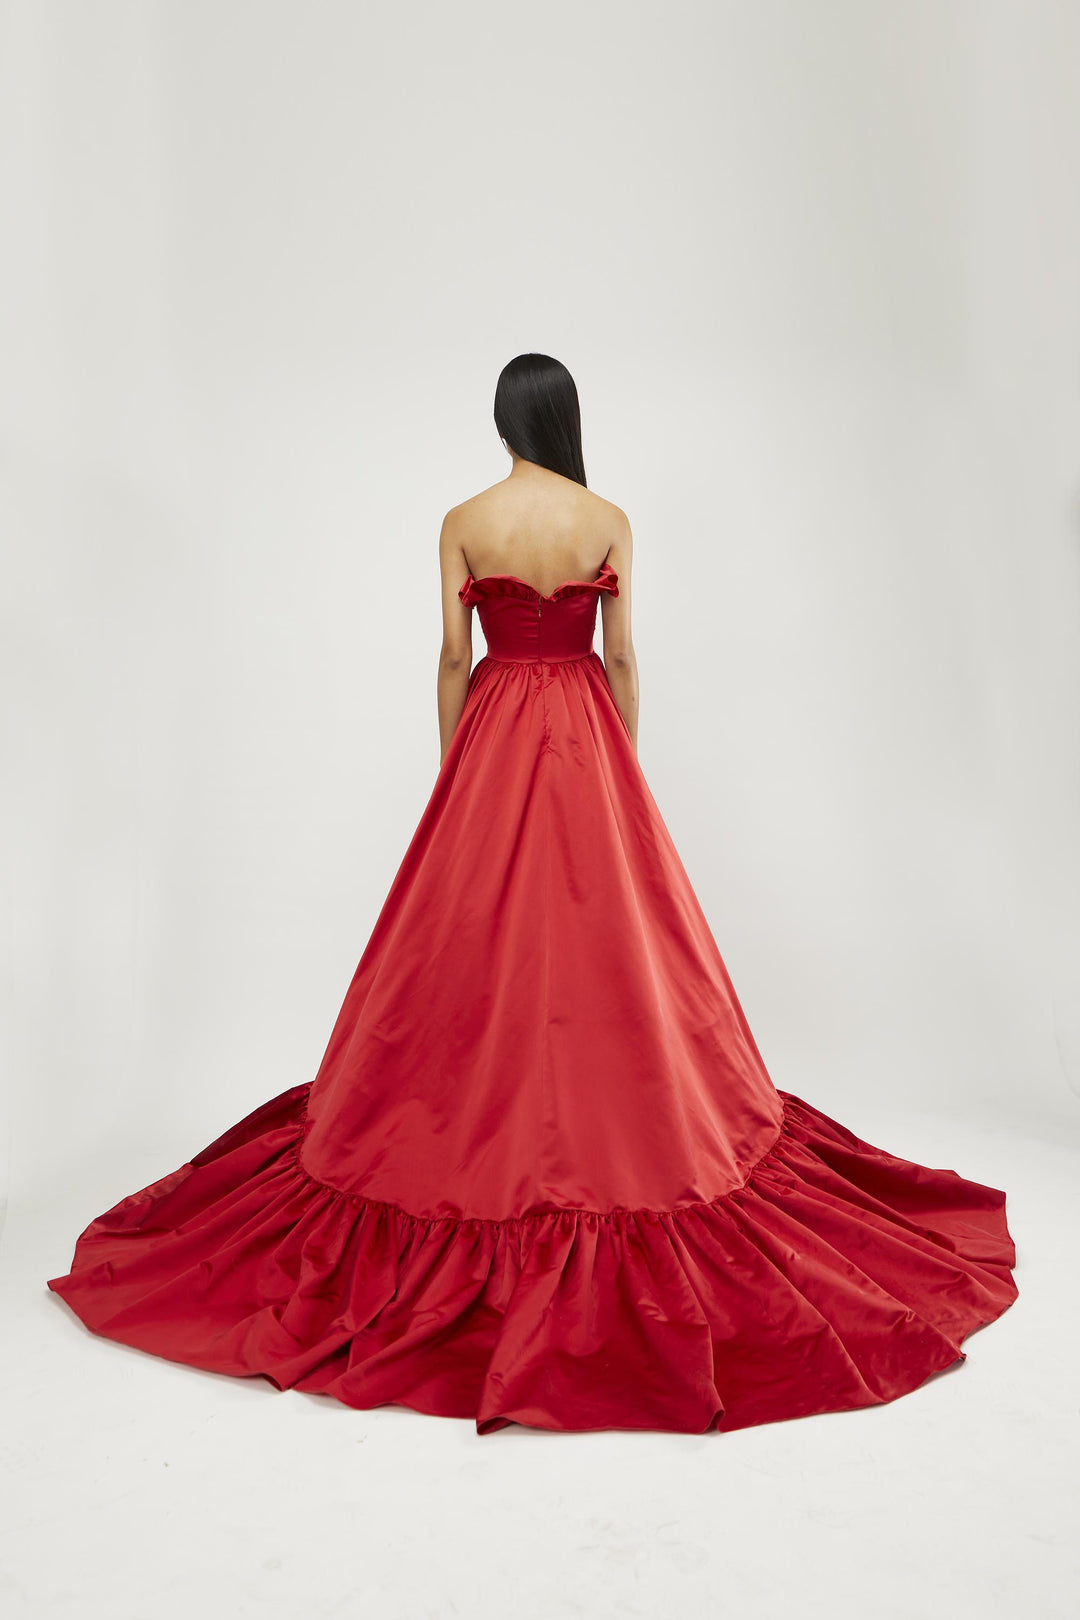 Strapless high-low gown with overlapping ruffled body and hem